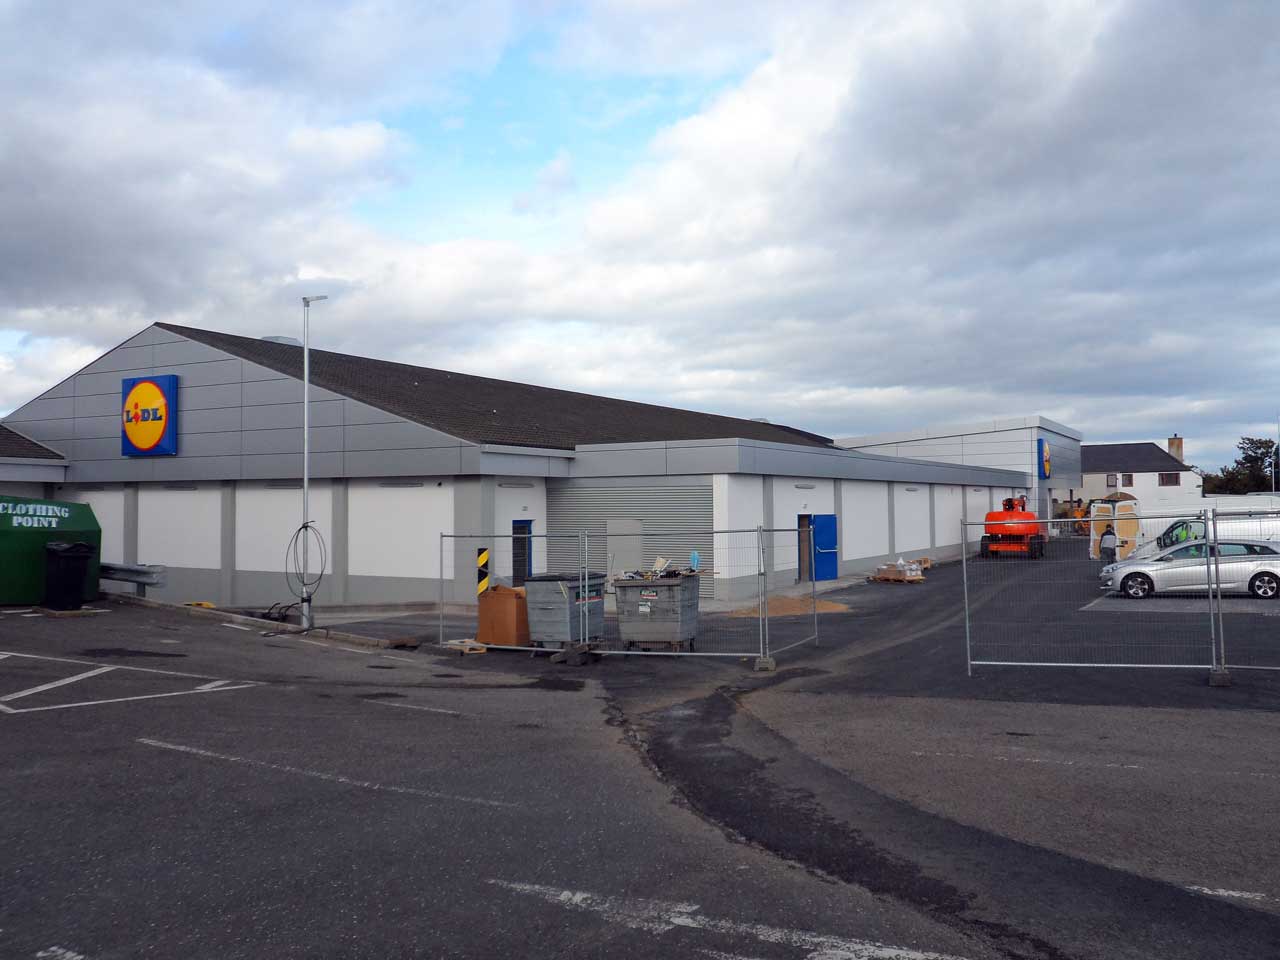 Photo: Lidl Extension Nears Completion, Wick - 27 September 2014